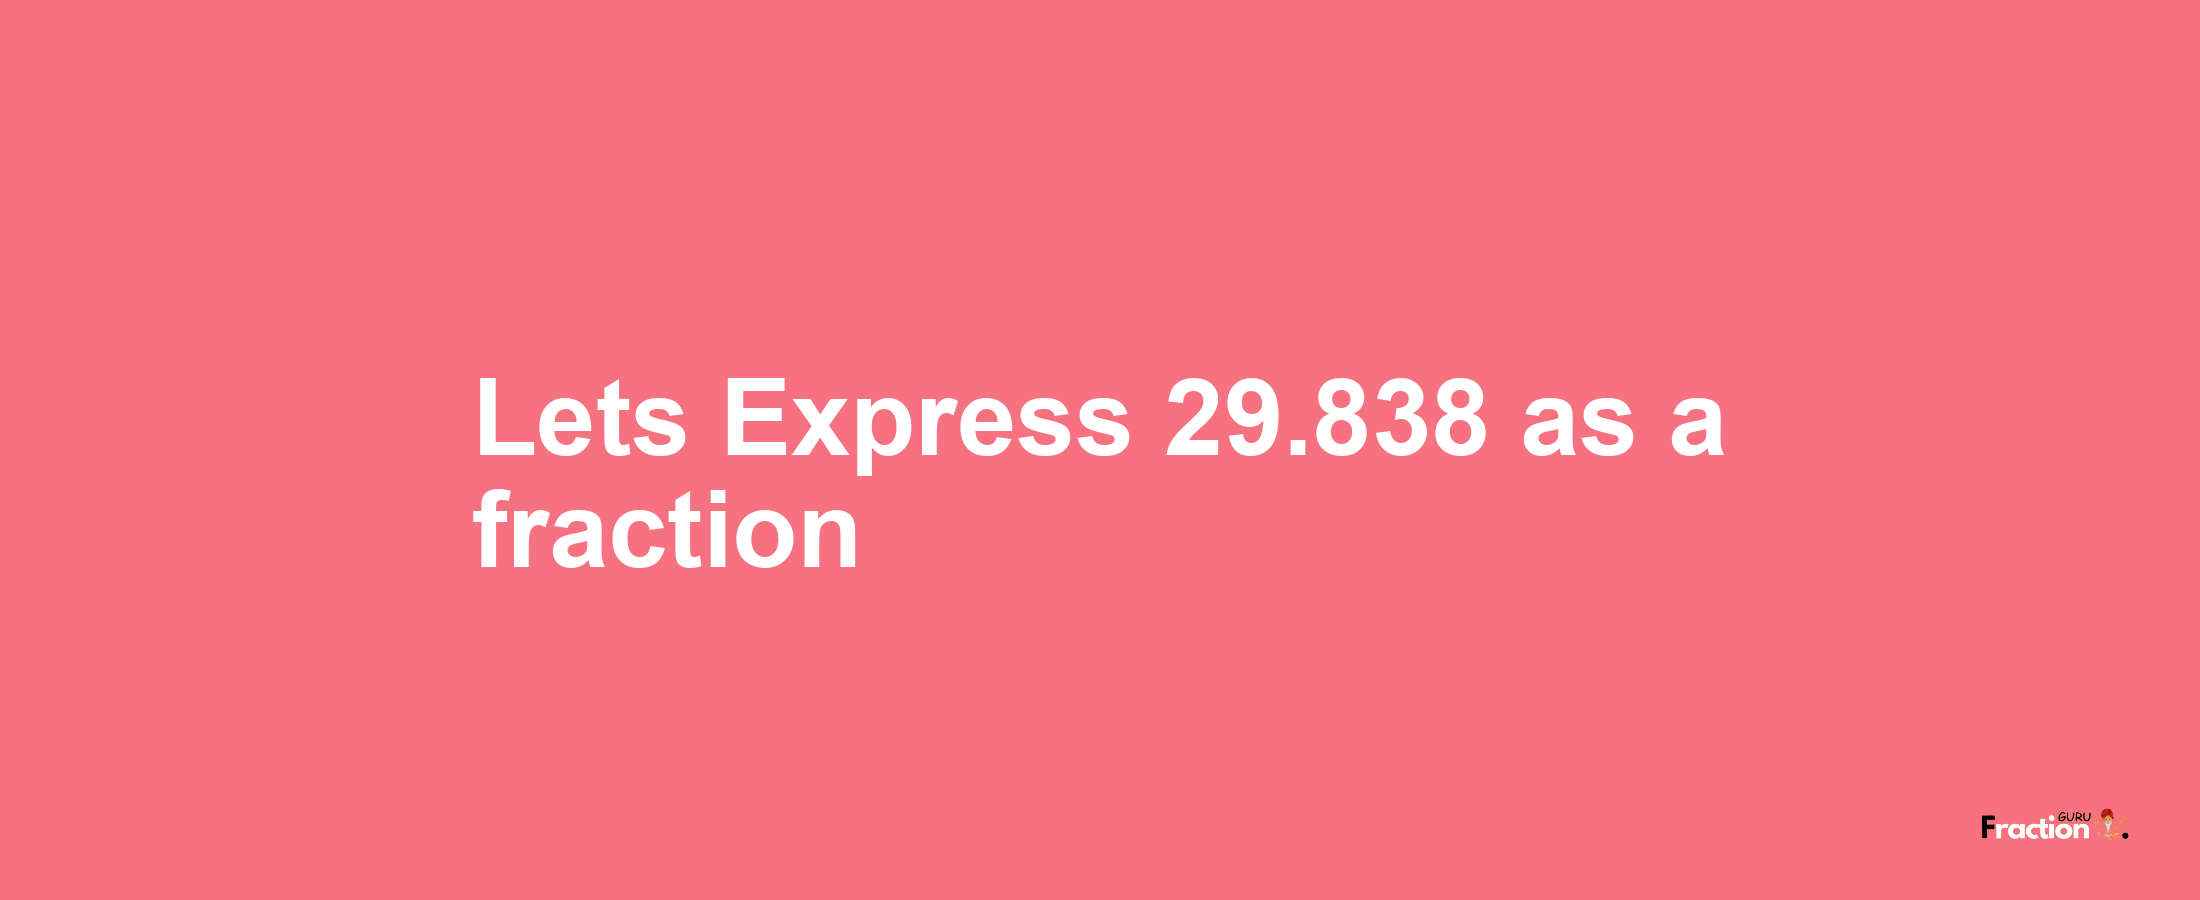 Lets Express 29.838 as afraction